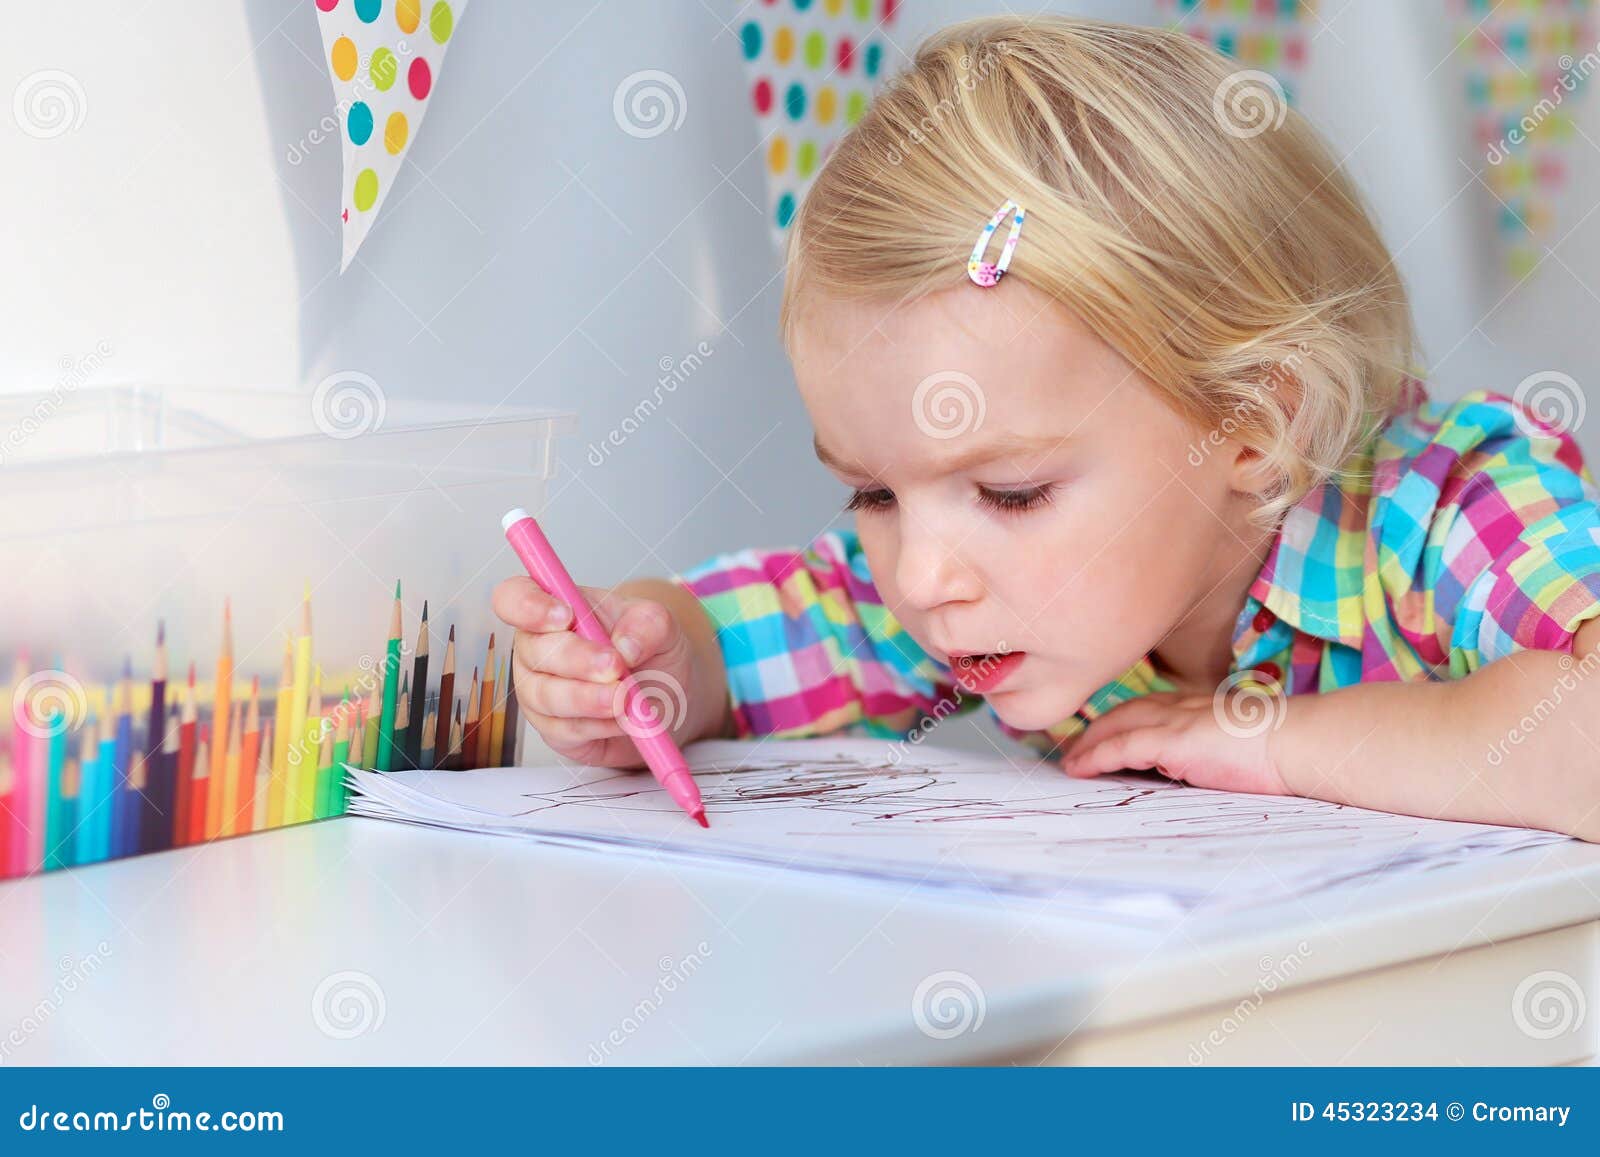 Little Girl Drawing With Colorful Pencils Stock Photo 